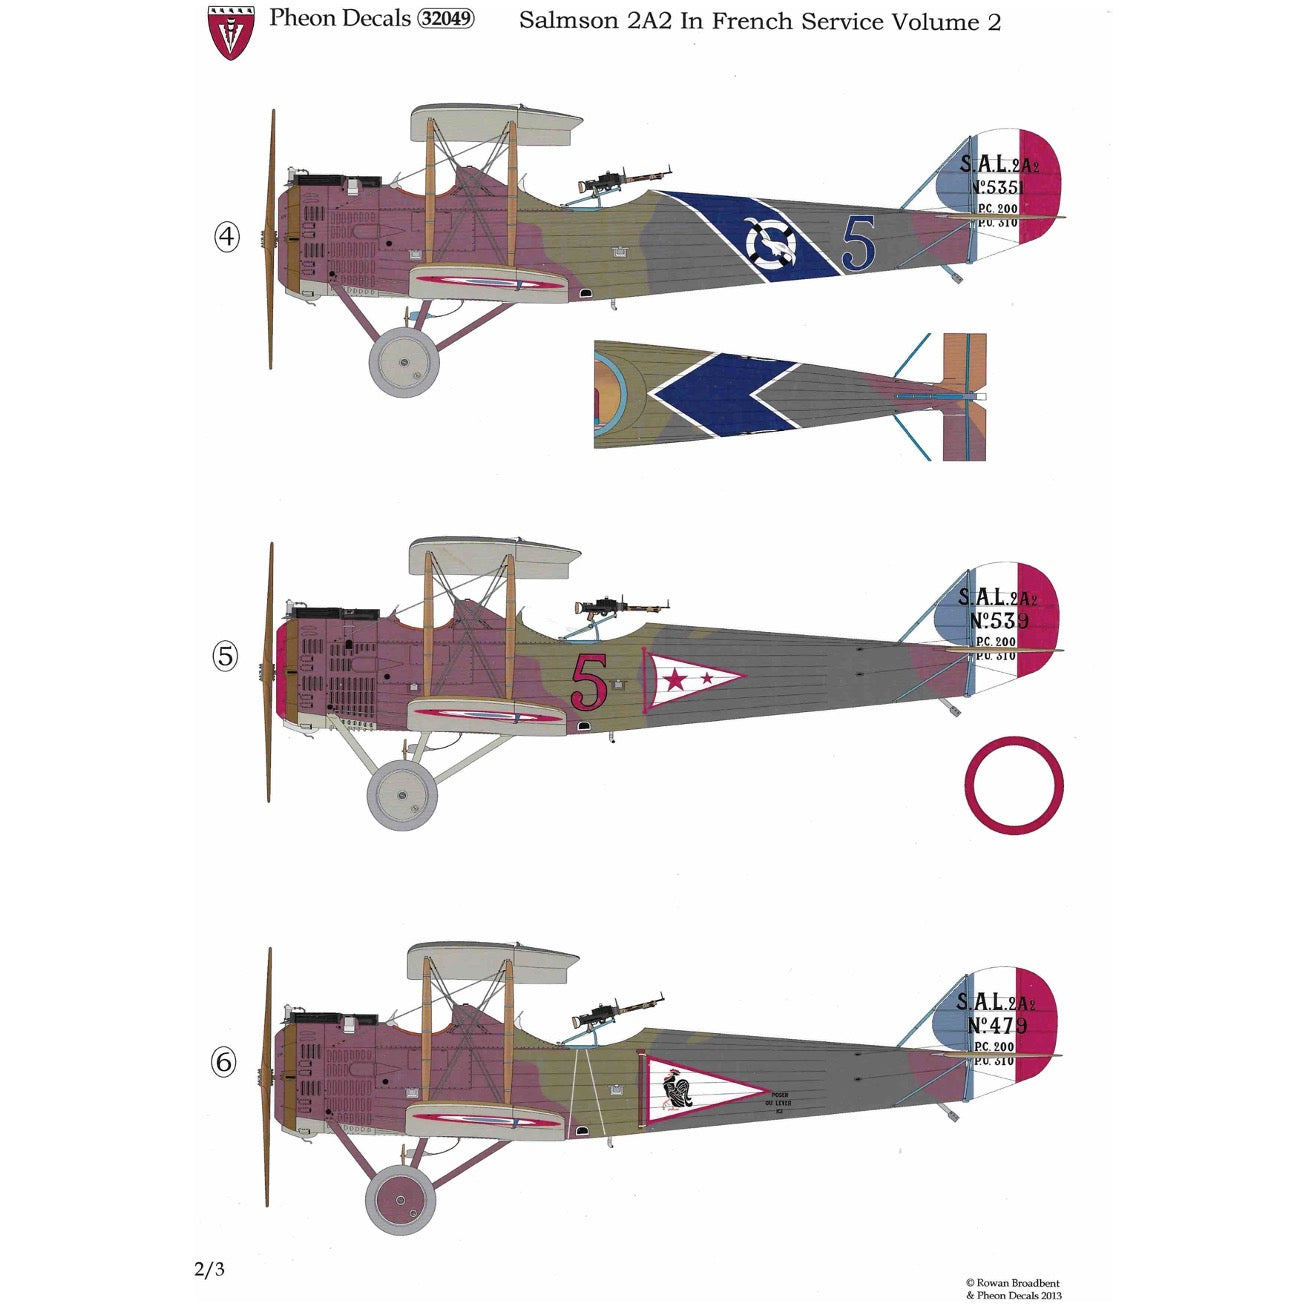 1/32 - Salmson 2A2 in French Service - Vol 2